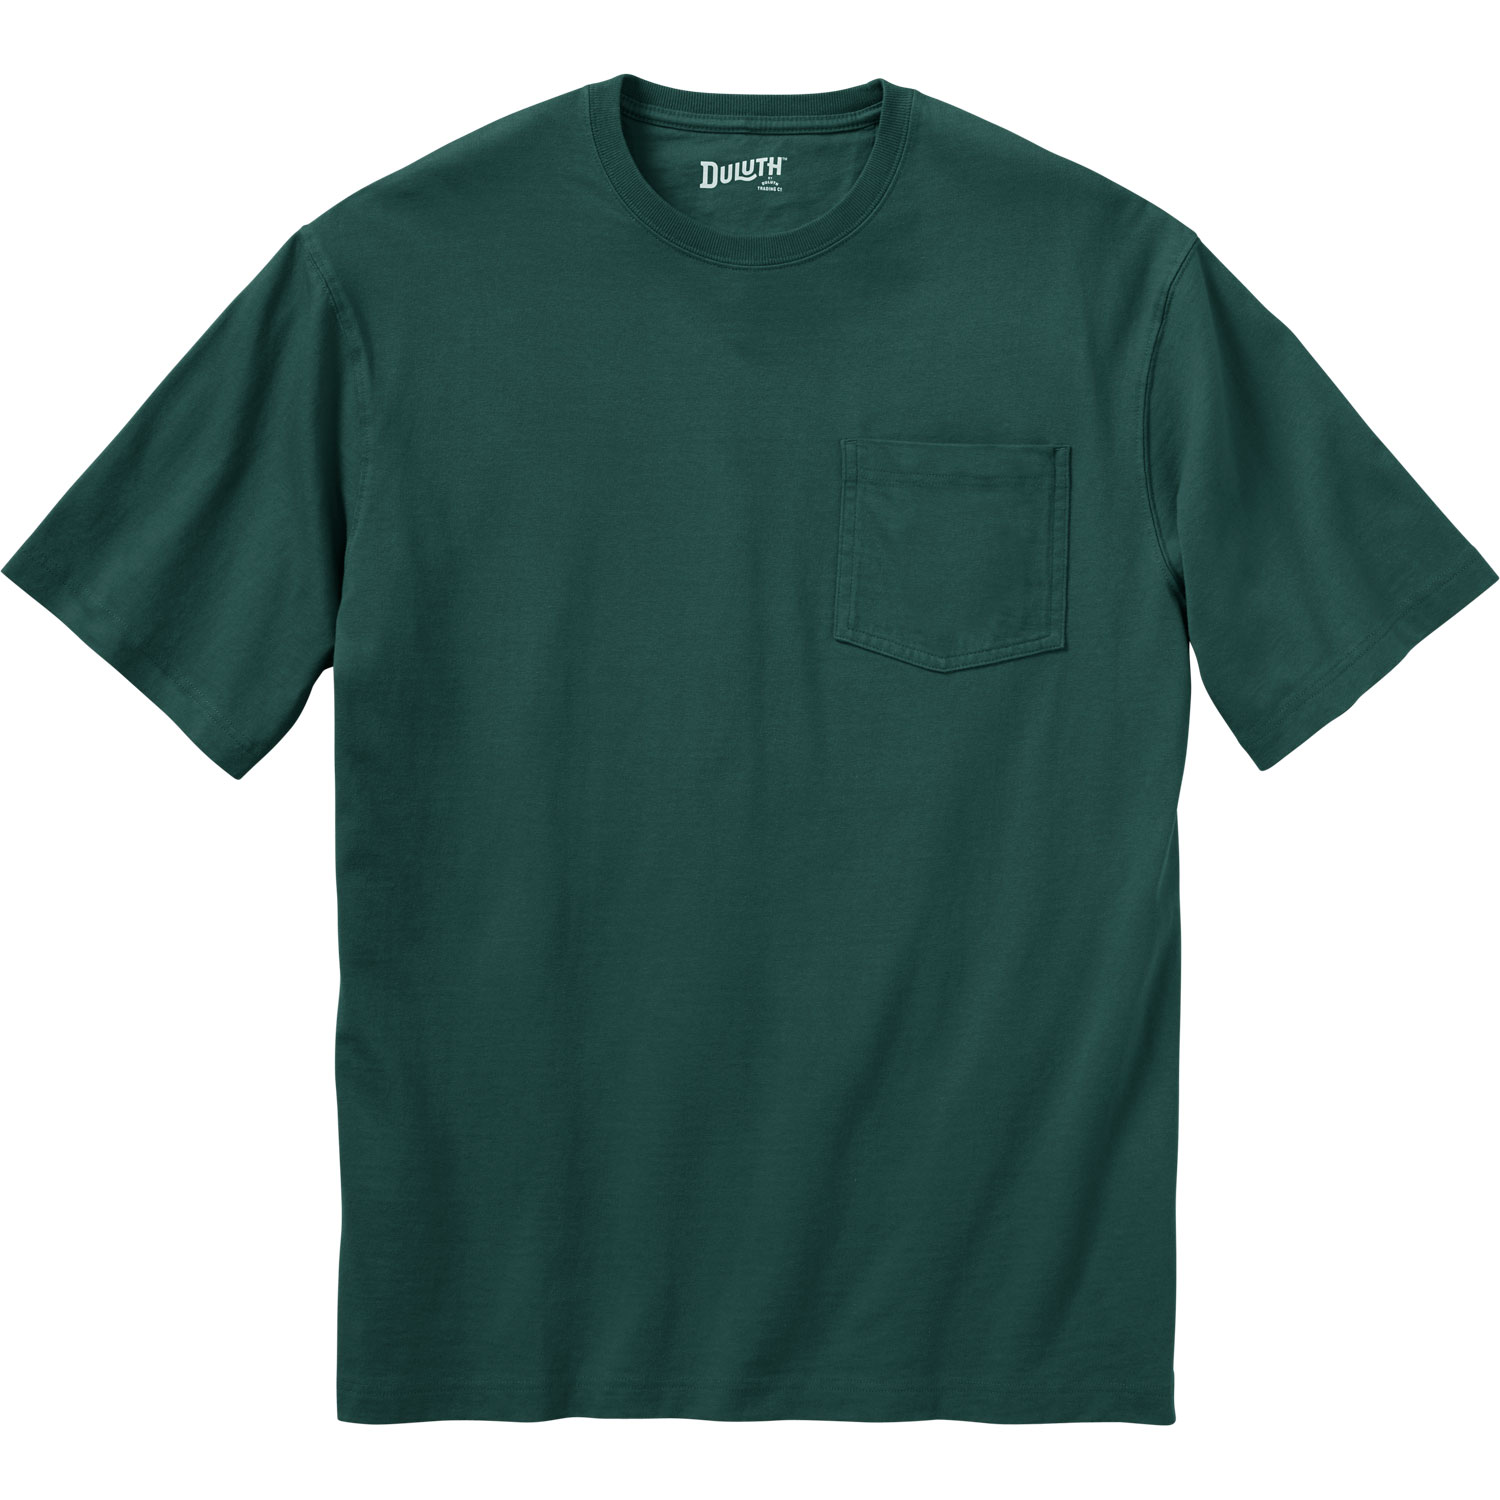 Men's Longtail T Short Sleeve Shirt With Pocket | Duluth Trading Company